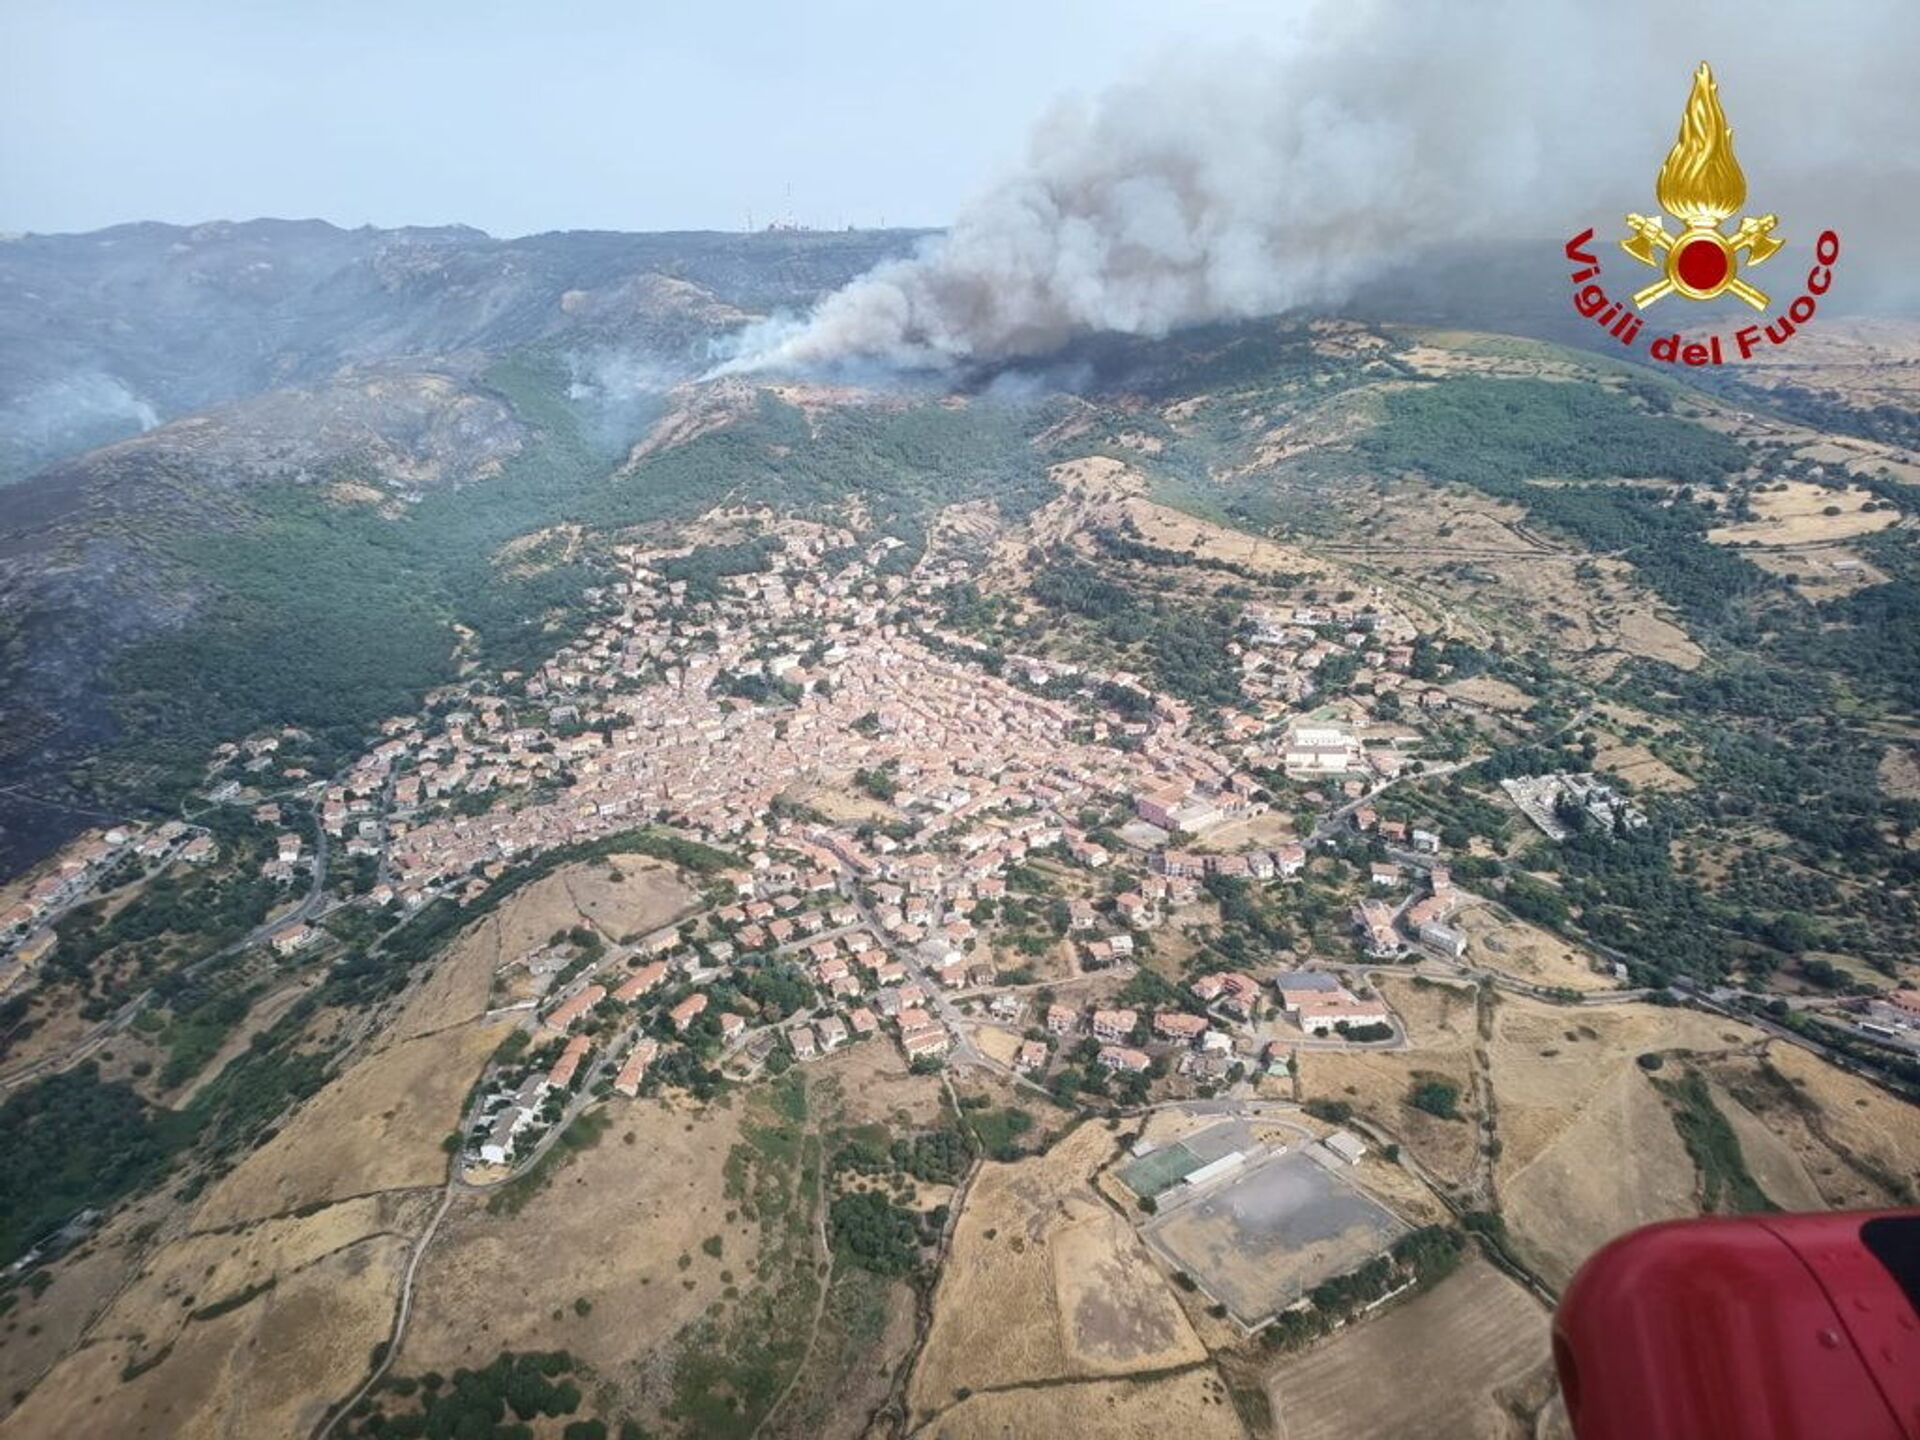 An aerial view from a helicopter shows a large wildfire that broke out near Santu Lussurgiu, Sardinia, Italy July 25, 2021. - Sputnik International, 1920, 07.09.2021